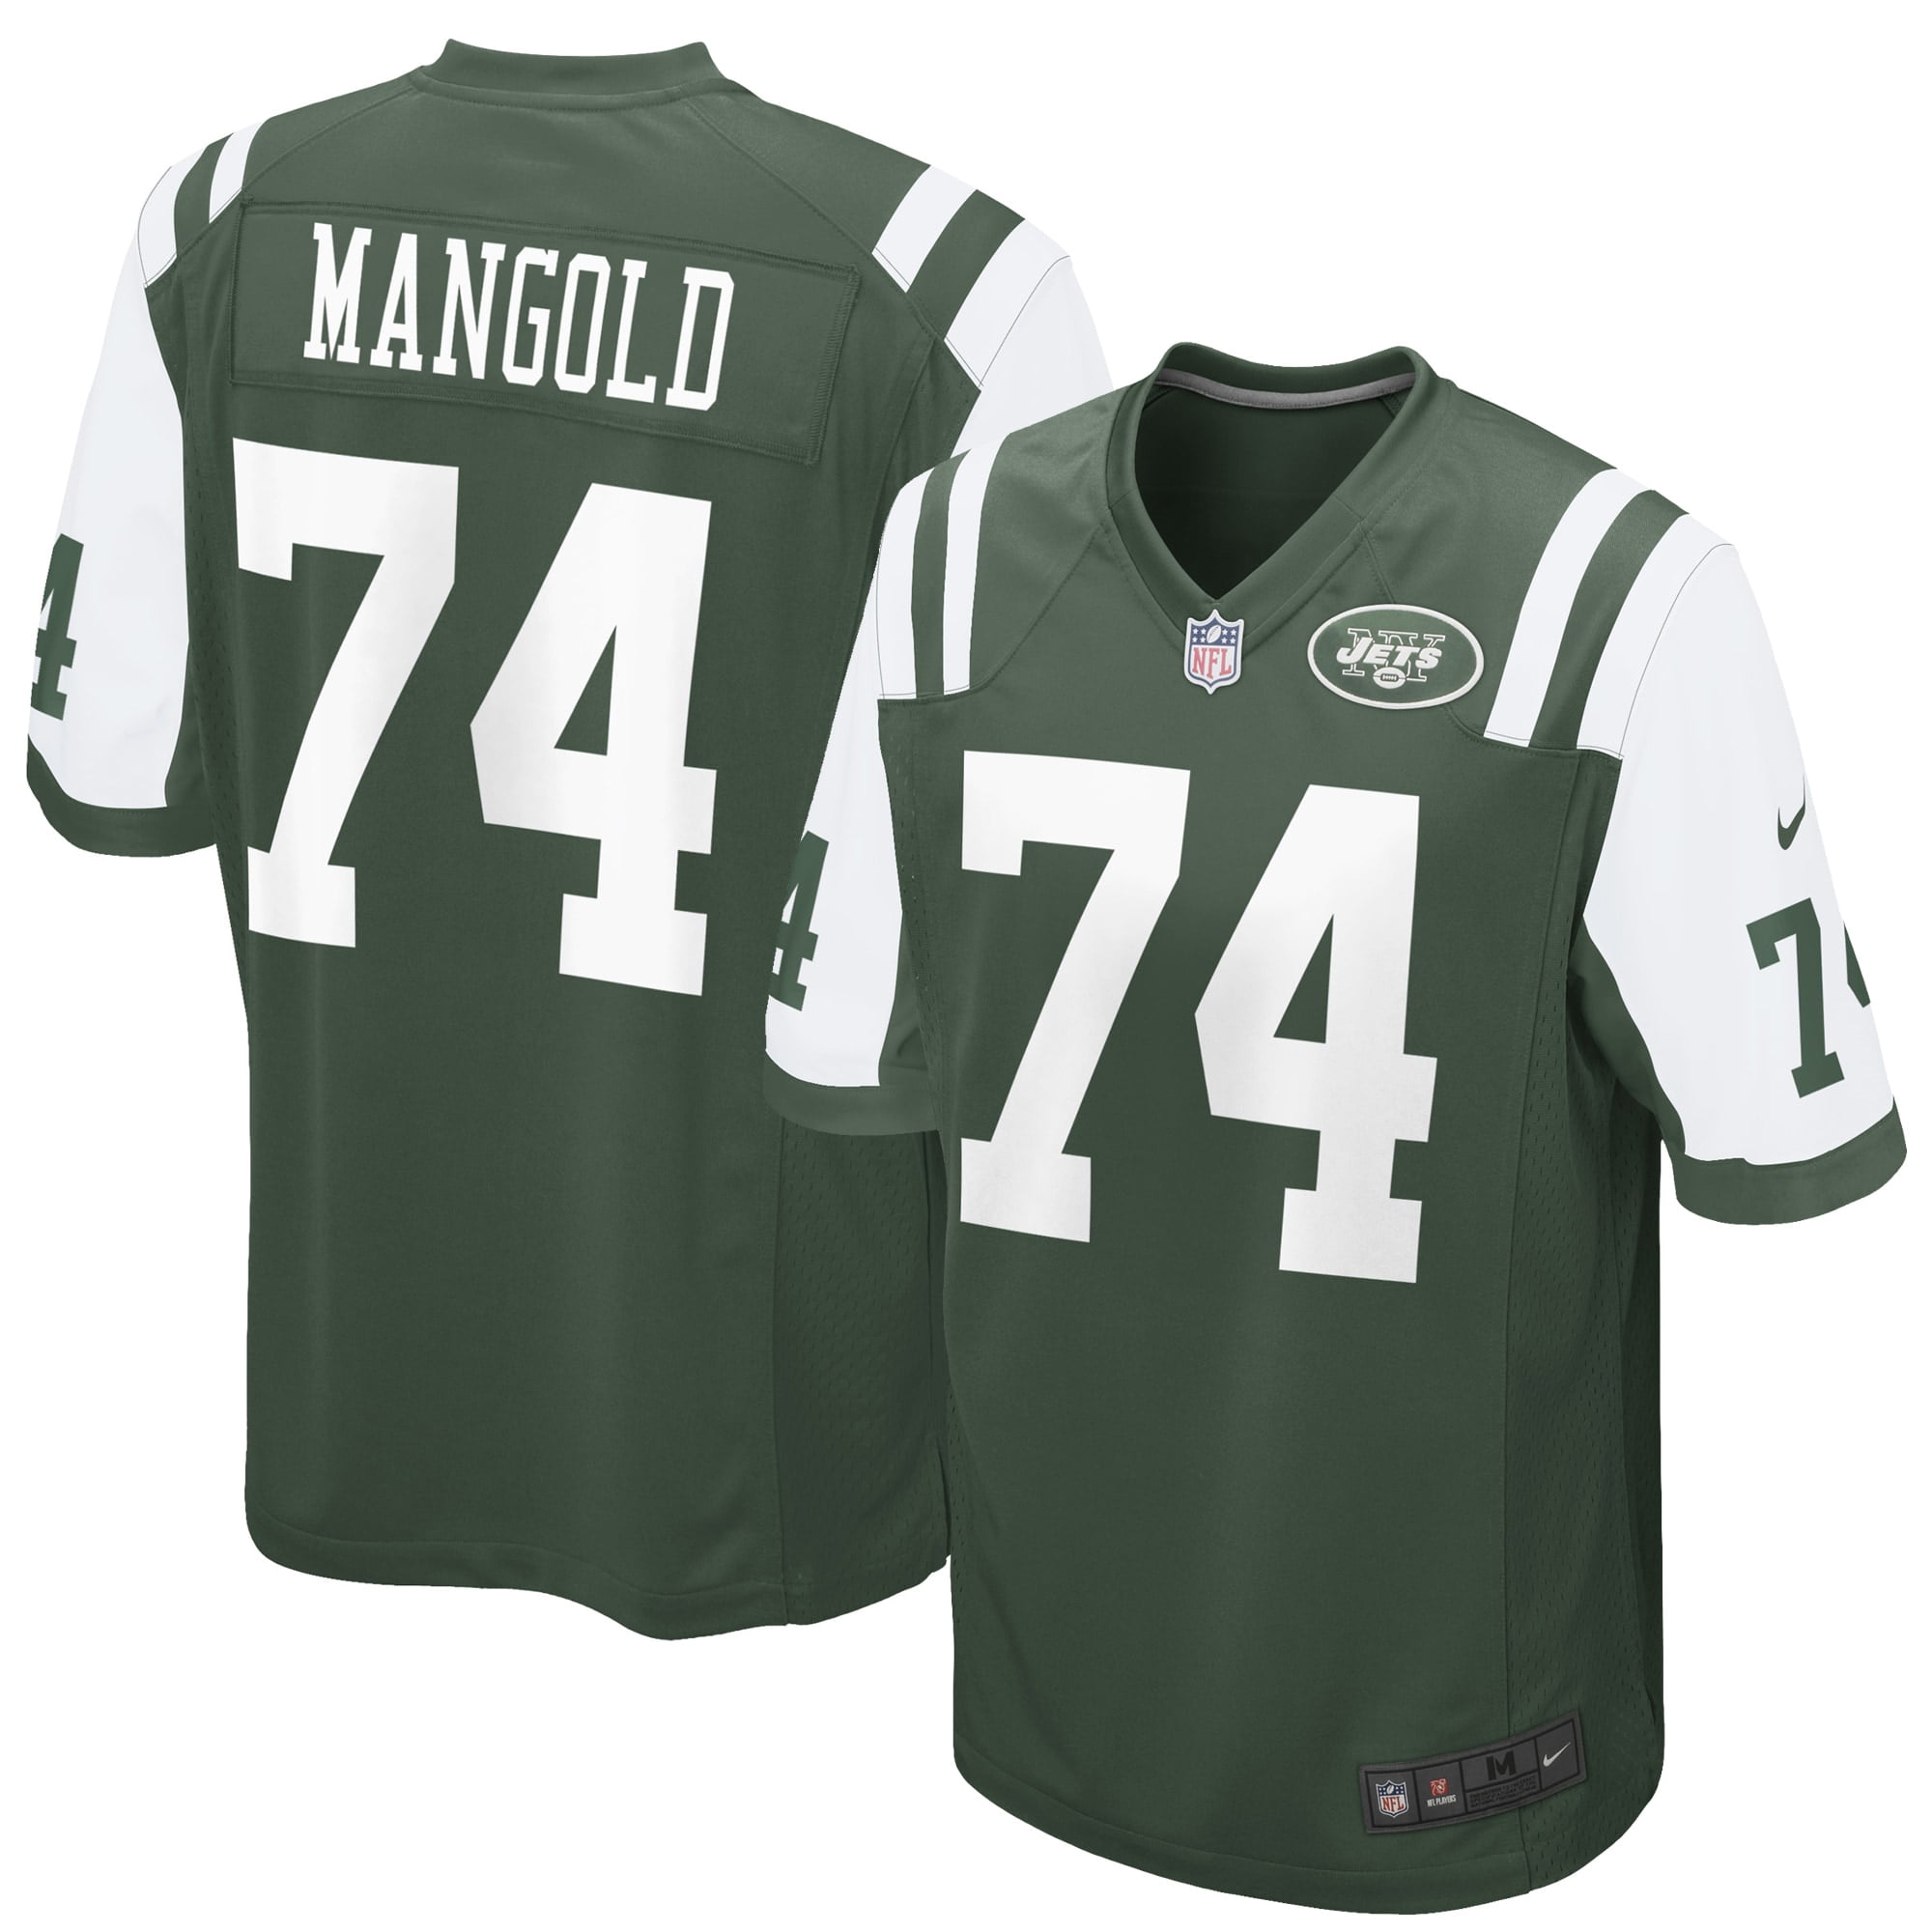 Nick Mangold New York Jets Nike Youth Team Color Game Jersey - Green - Walmart.com